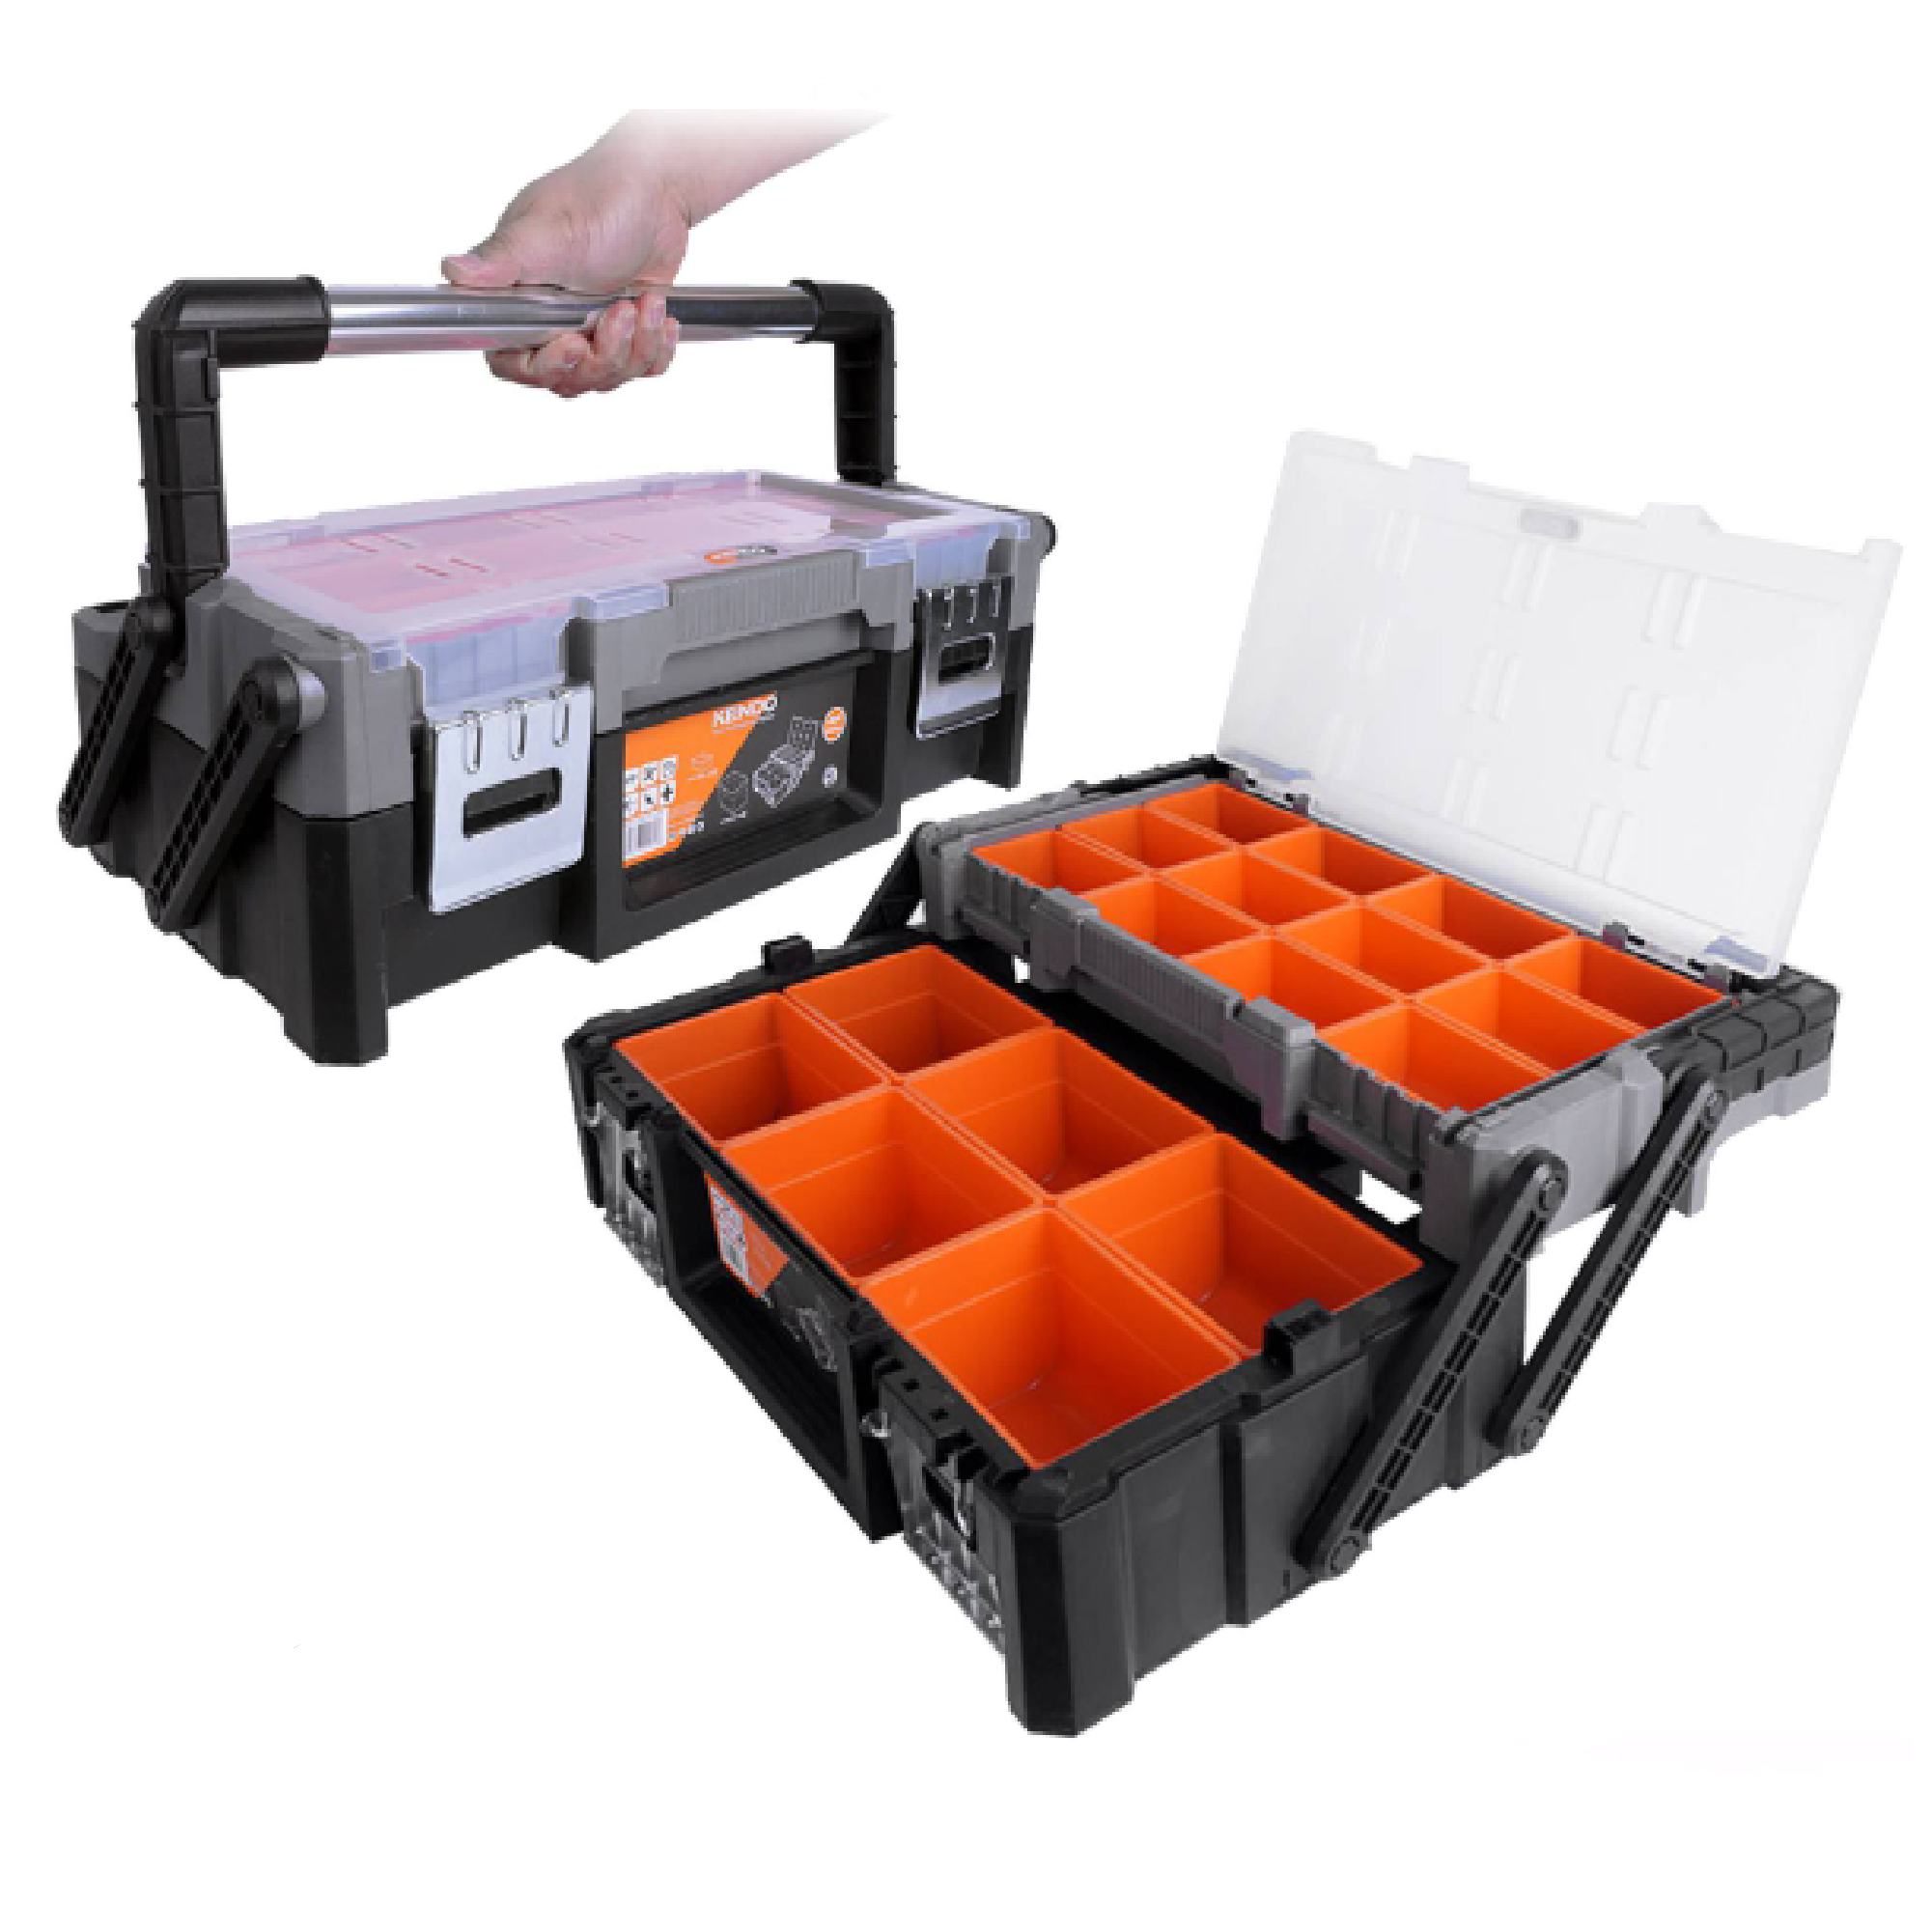 Kendo KD-90271 Cantilever Tool Box 18"/450MM With ORANGE Part Boxes